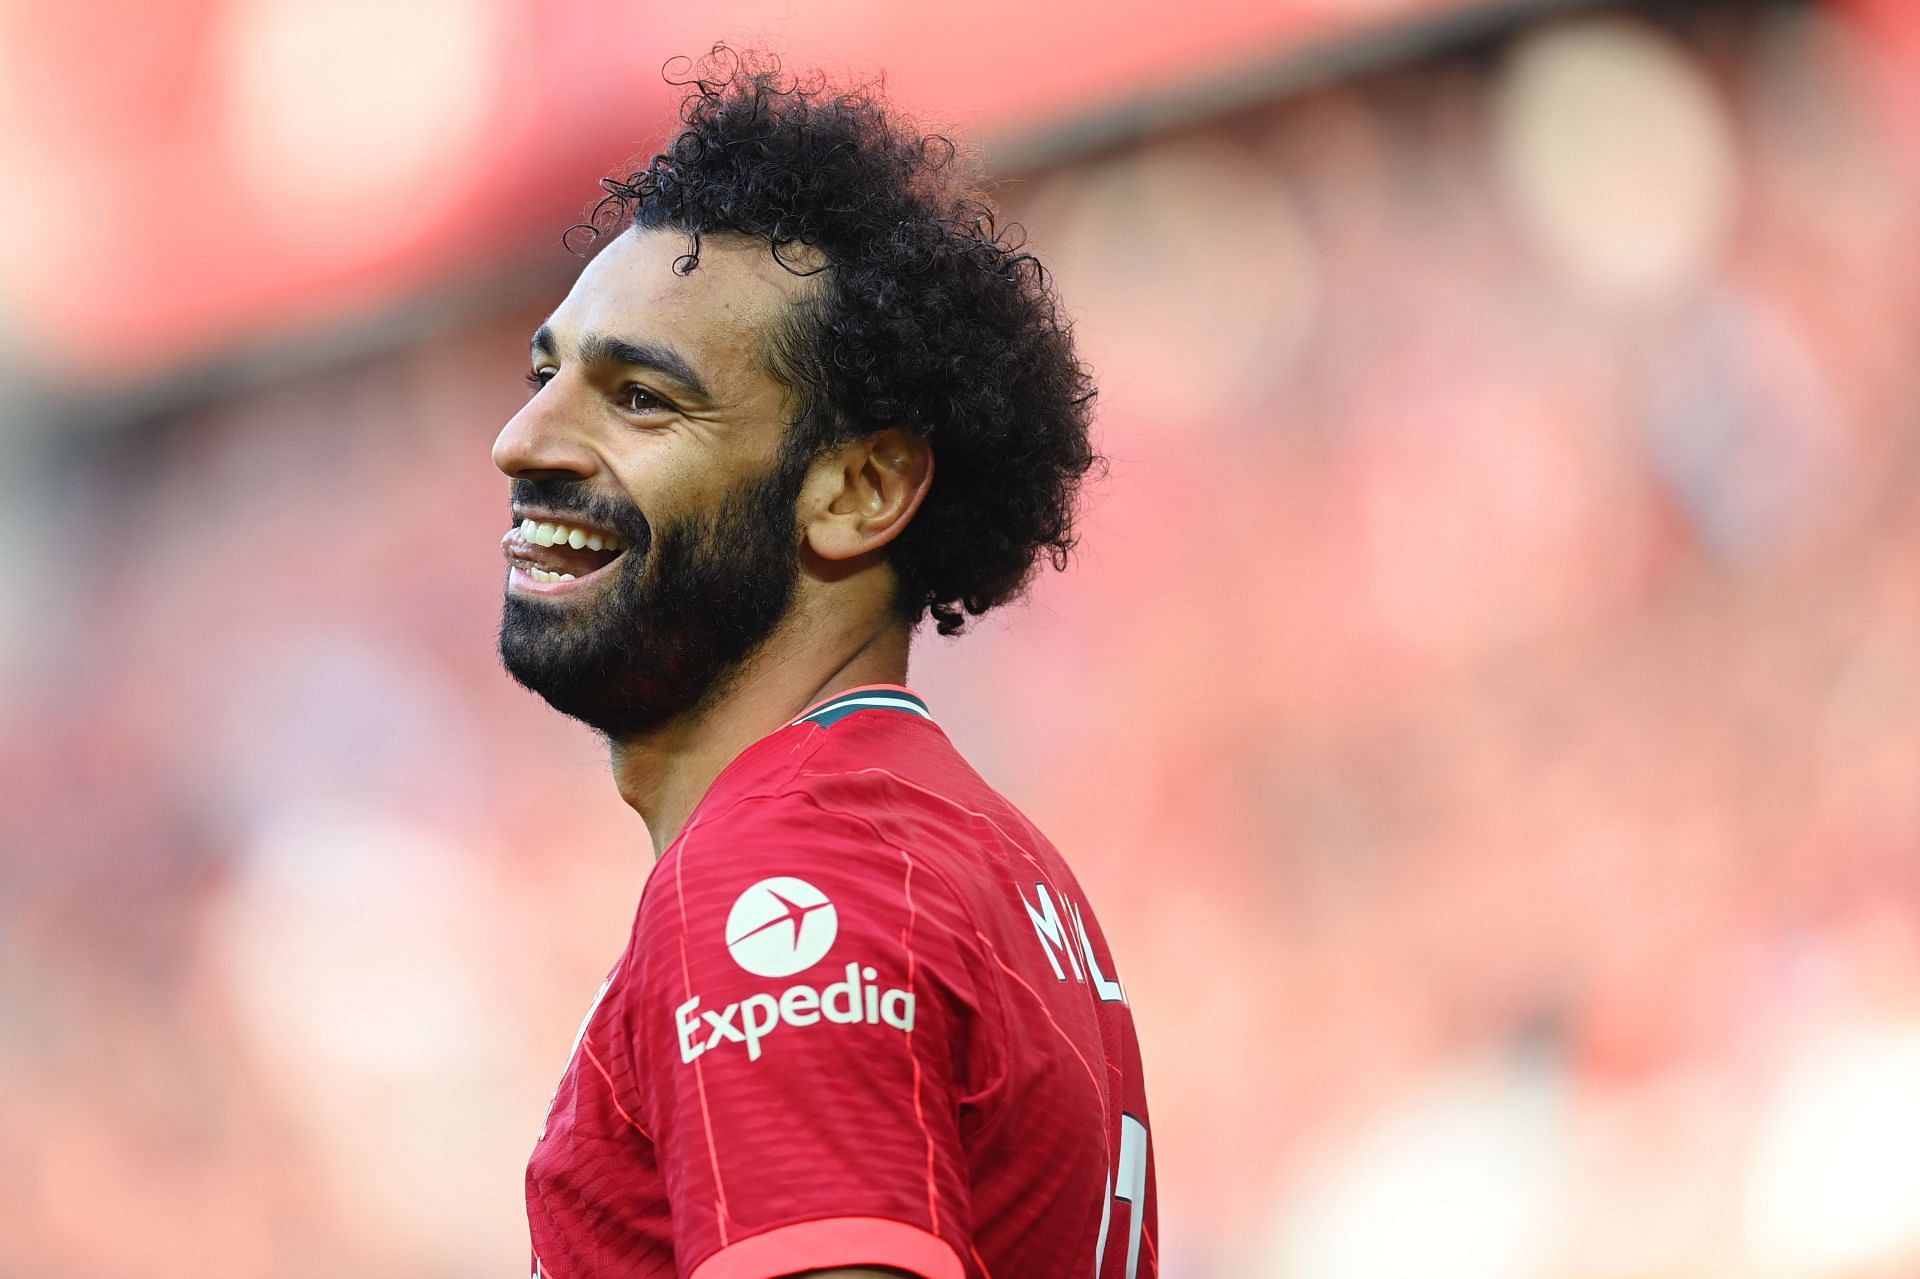 Mohamed Salah has been a colossal player for Liverpool.